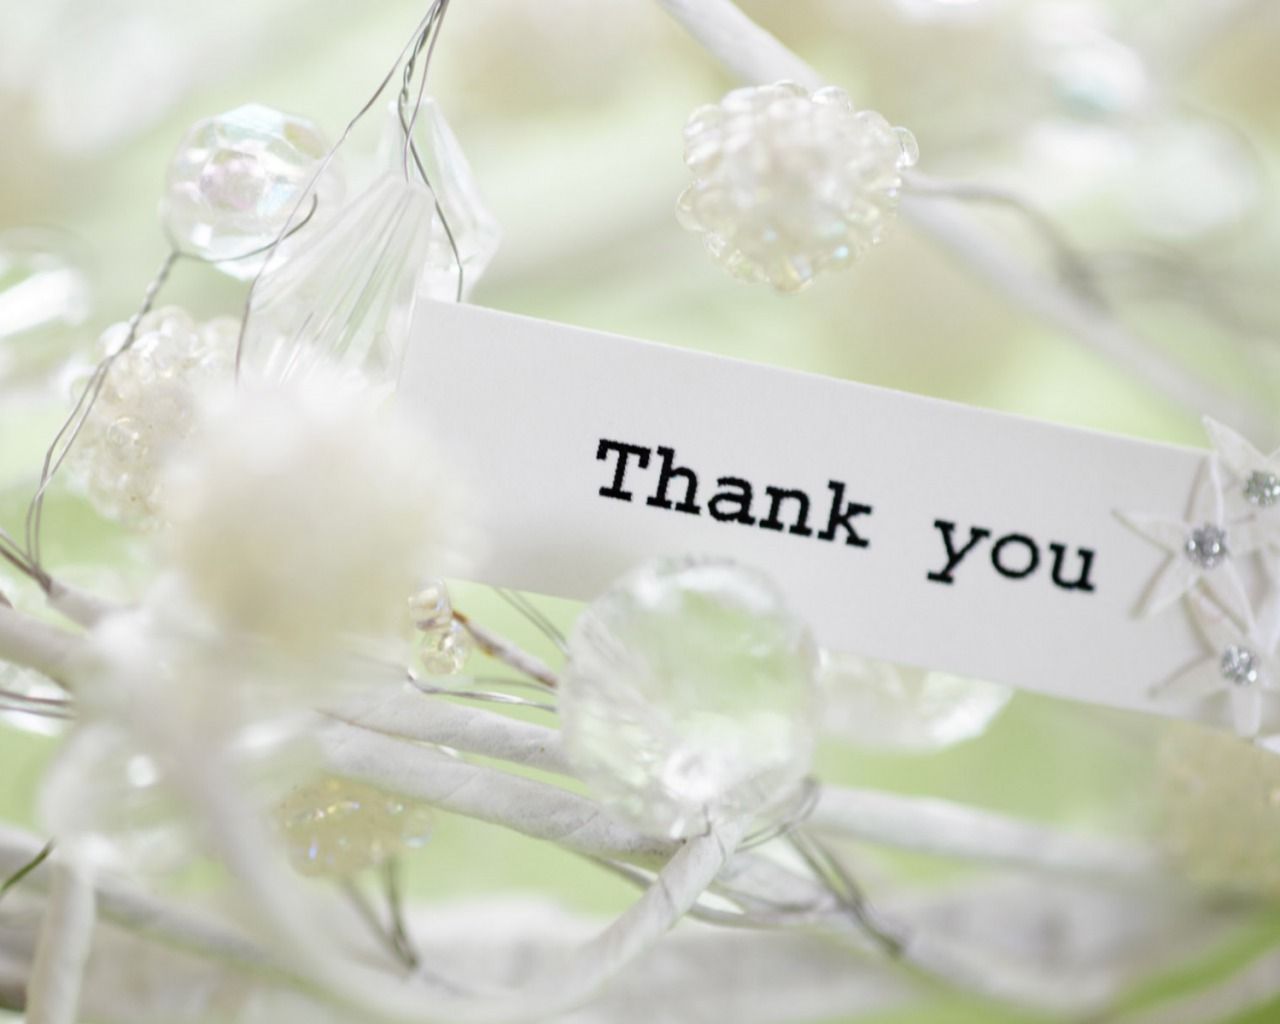 Thank You desktop free hd wallpapers | Wallpapers Wide Free